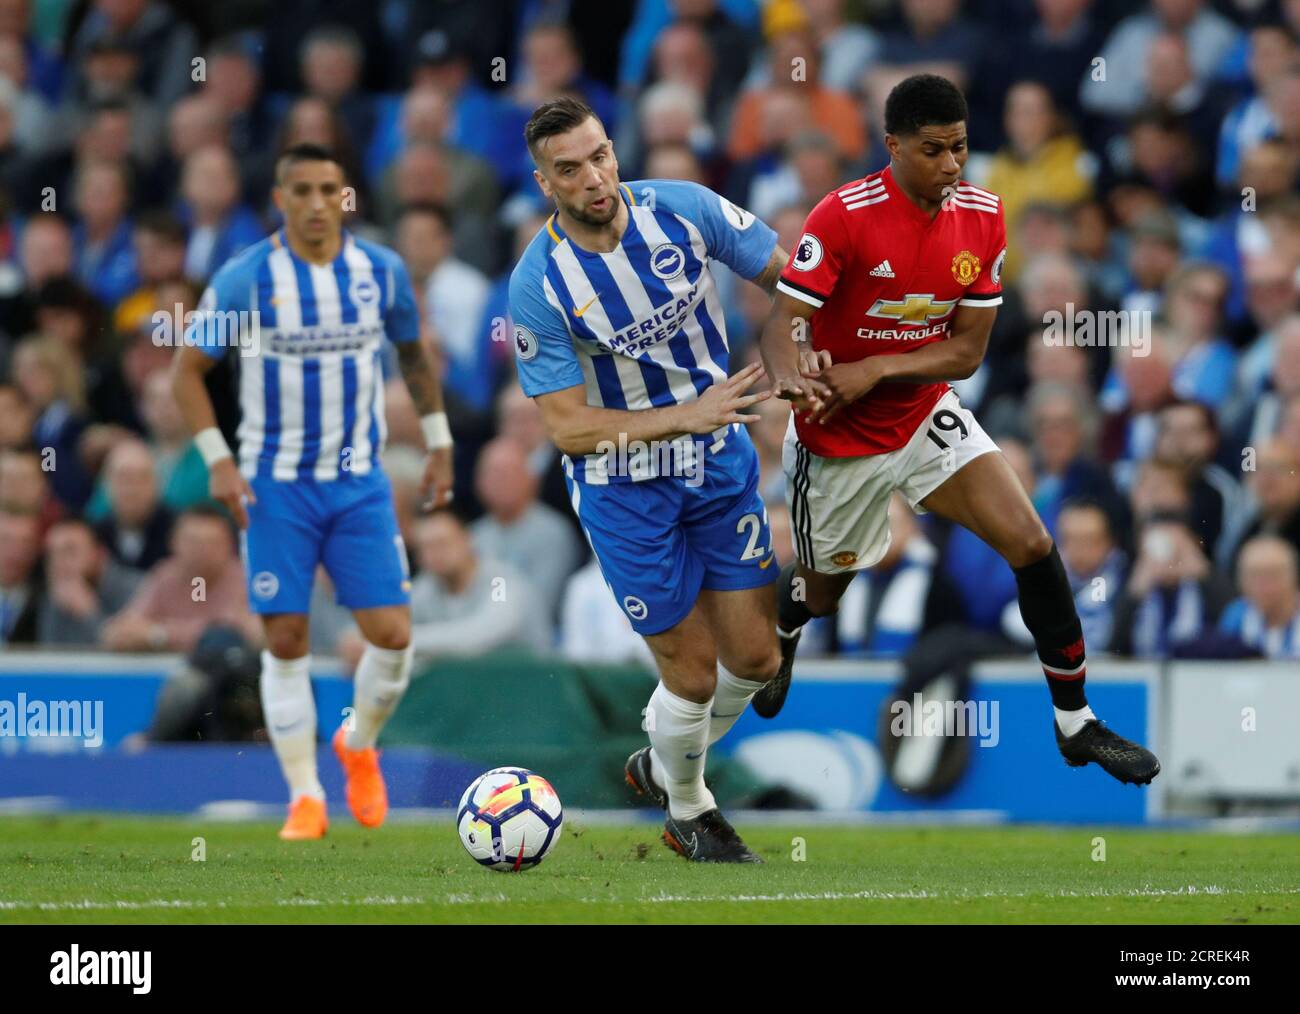 Soccer Football - Premier League - Brighton & Hove Albion v Manchester United - The American Express Community Stadium, Brighton, Britain - May 4, 2018   Manchester United's Marcus Rashford in action with Brighton's Shane Duffy    Action Images via Reuters/Paul Childs    EDITORIAL USE ONLY. No use with unauthorized audio, video, data, fixture lists, club/league logos or 'live' services. Online in-match use limited to 75 images, no video emulation. No use in betting, games or single club/league/player publications.  Please contact your account representative for further details. Stock Photo